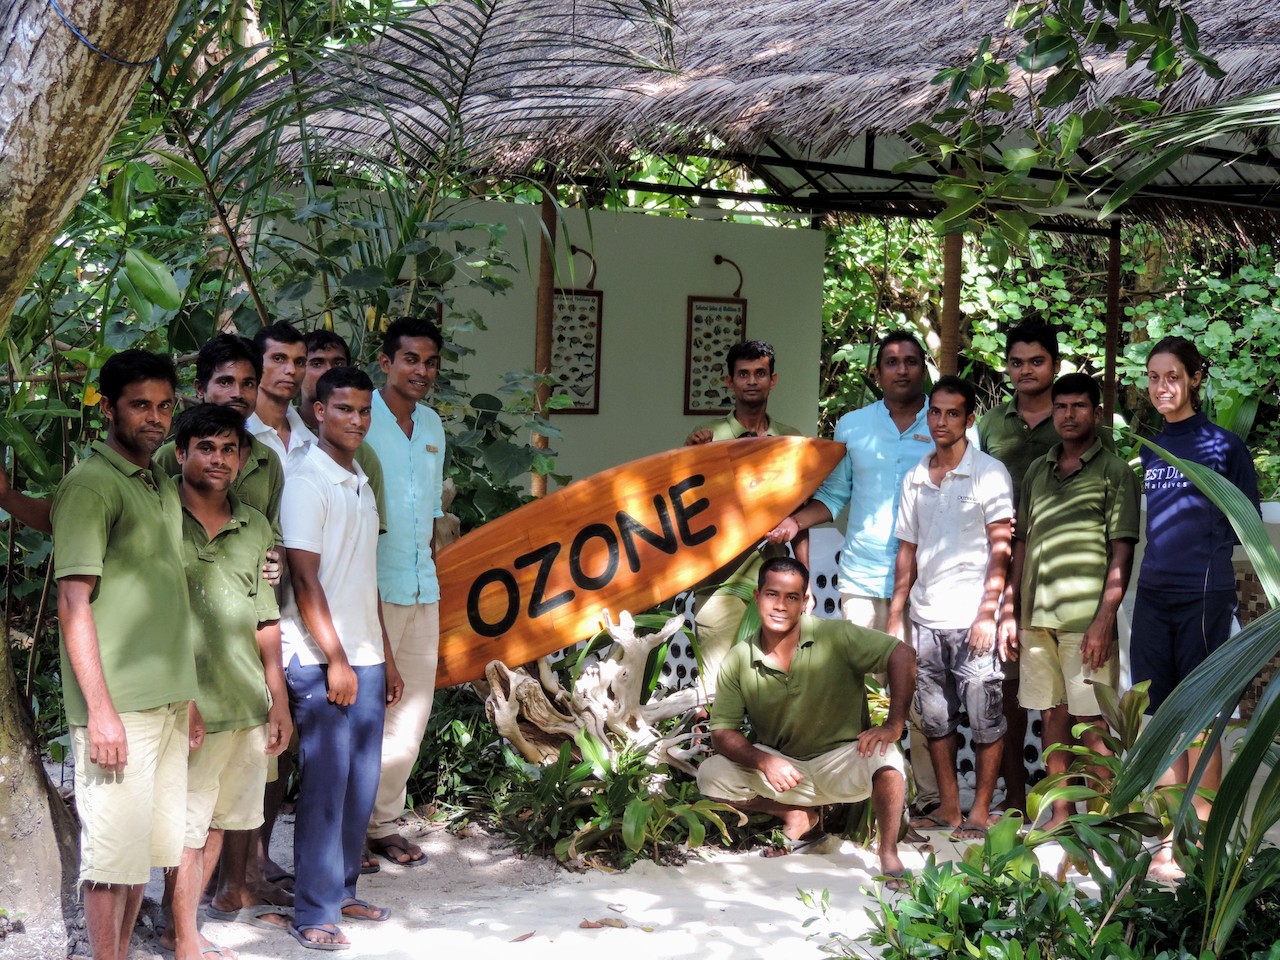 The sustainable OZONE Hut – made for presentations and talks on marine life at the Outrigger